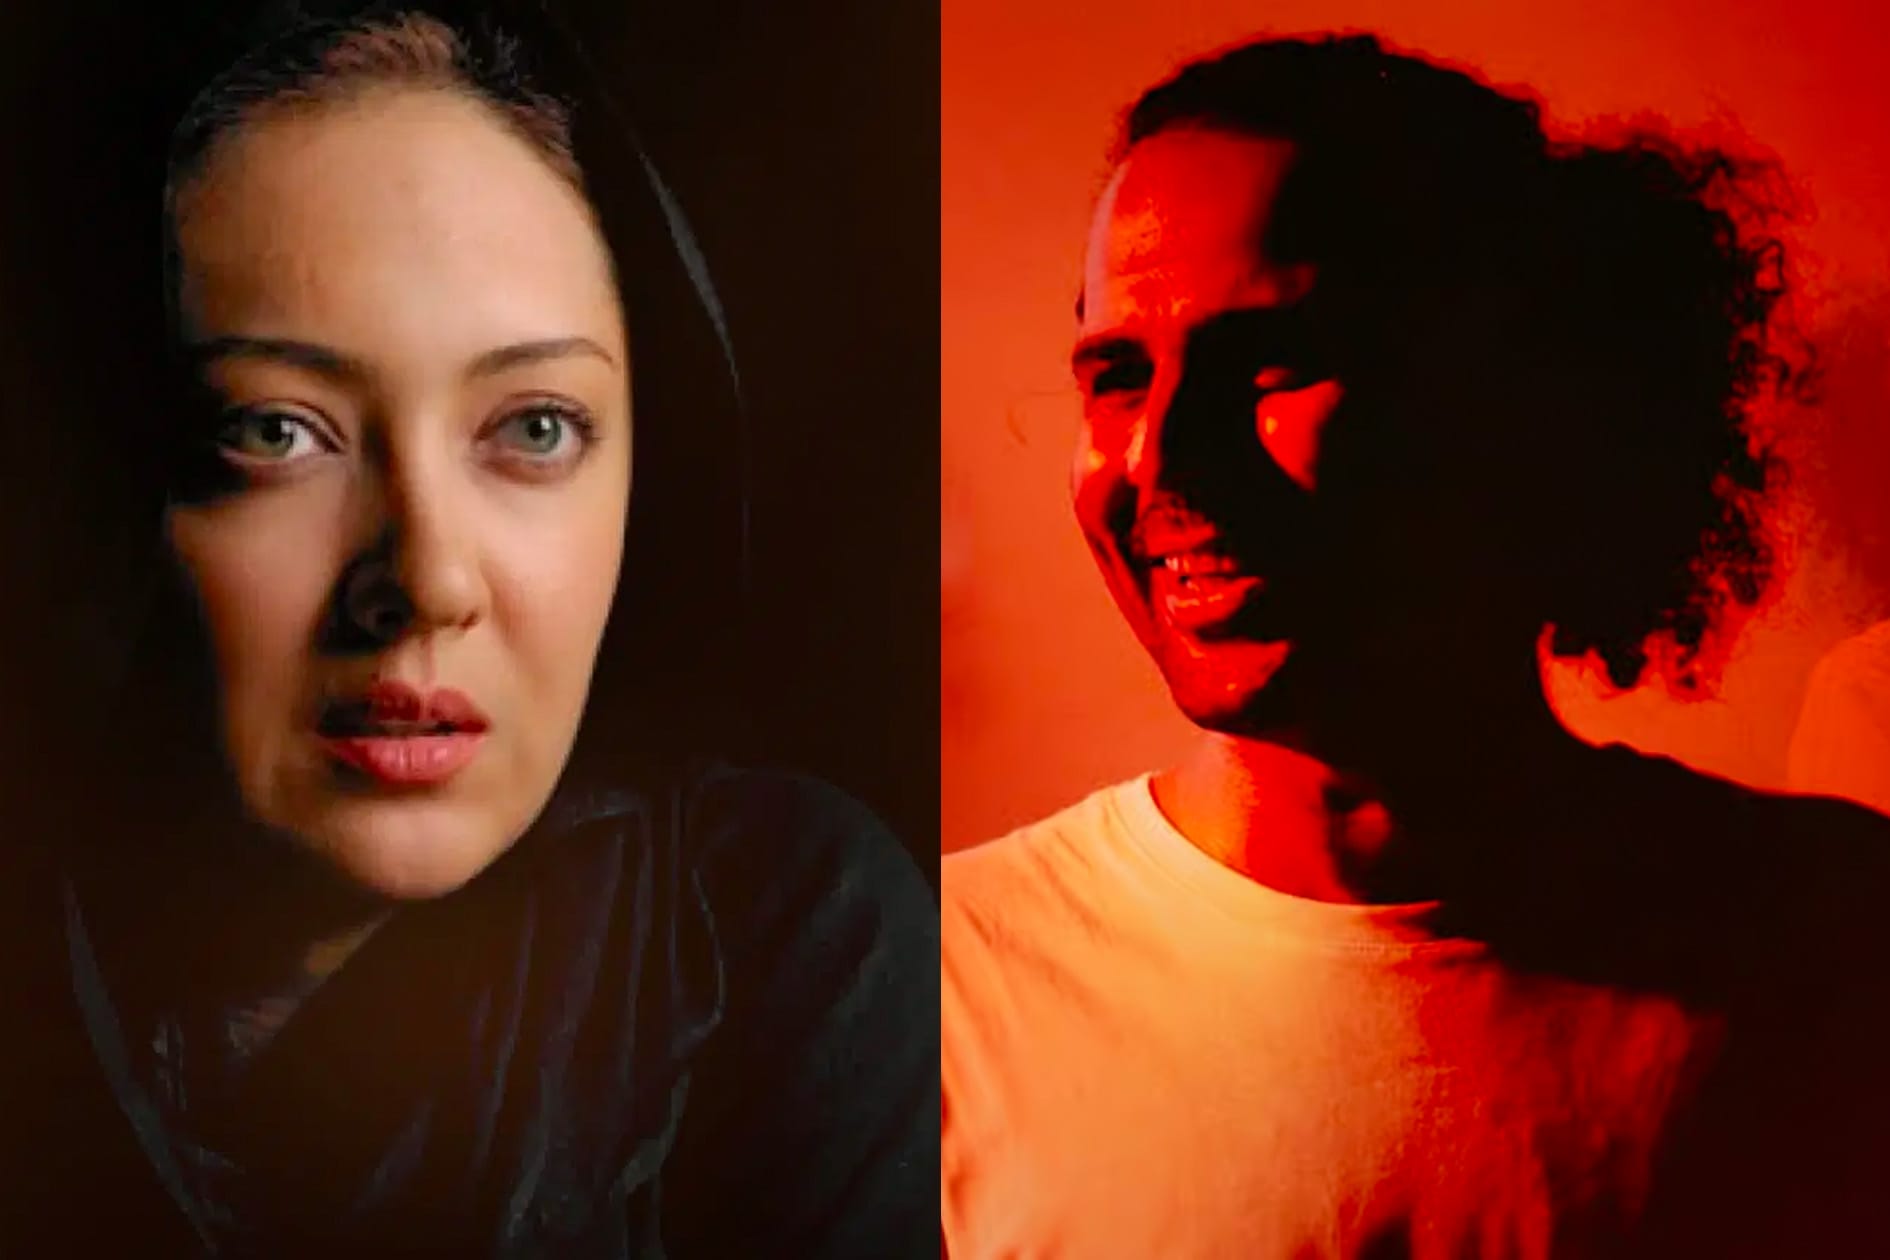 Split image. On the left, A close up of a woman's face. She is wearing a black top and headscarf and is looking past the viewer. On the right, Iranian singer Heydoo is pictured smiling. Behind him are two more images of him, one singing into a microphone, the other looking thoughtful. The image has red and orange tones.